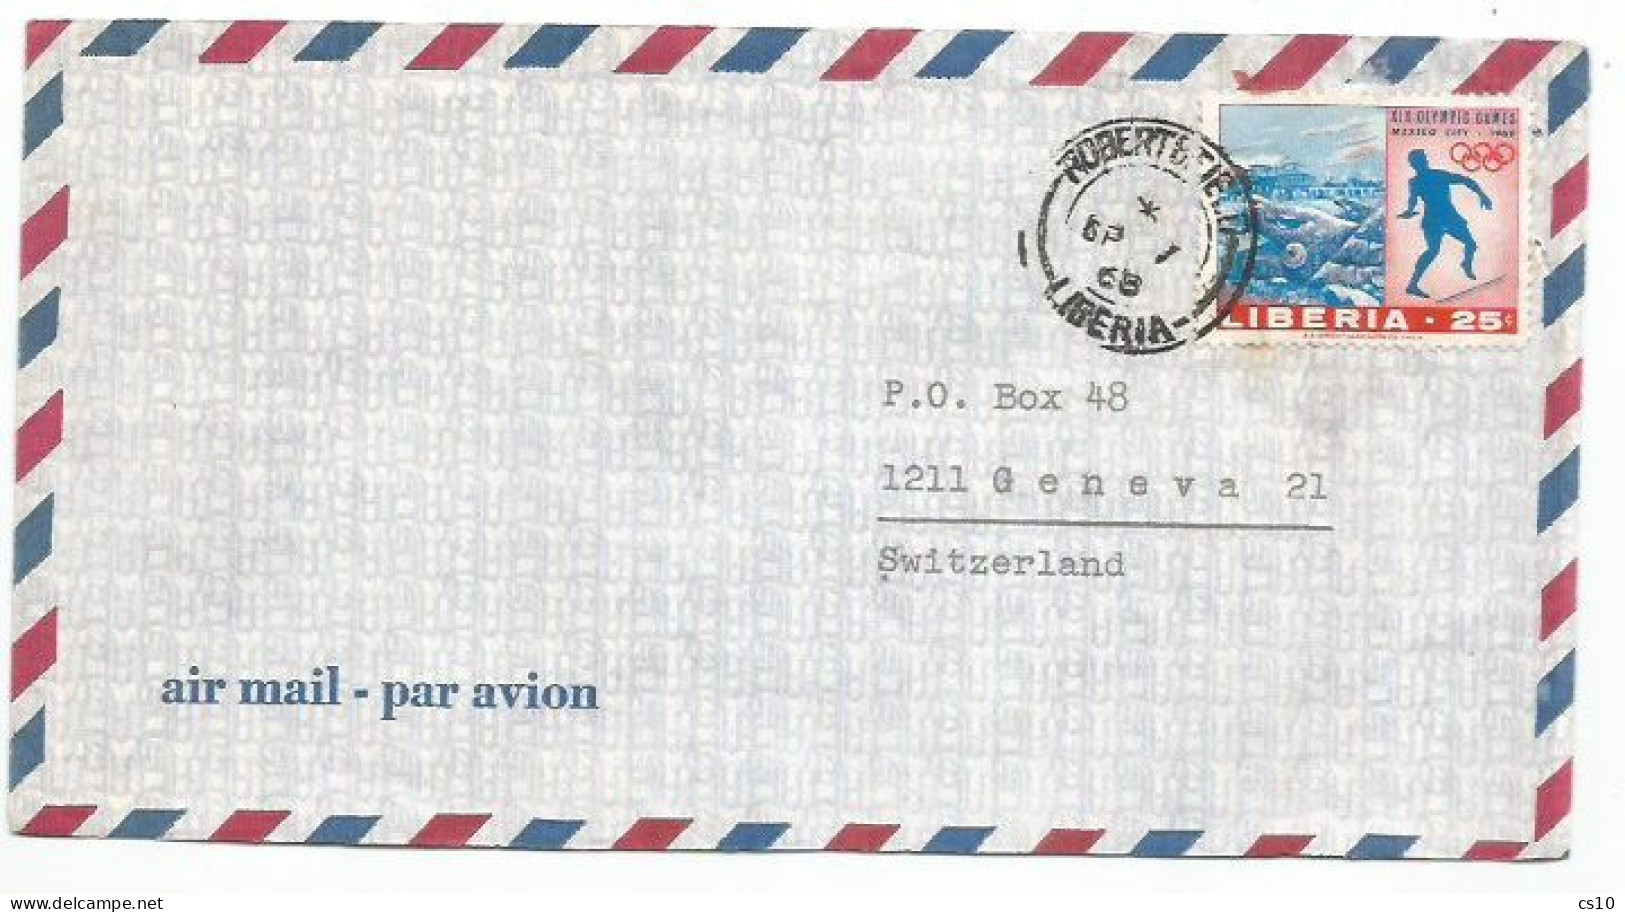 Liberia Airmail Cover Robertsfield 7sep1968 X Suisse With Olympic Games Mexico 1968 C.25 Discus Throw Solo Franking - Atletiek